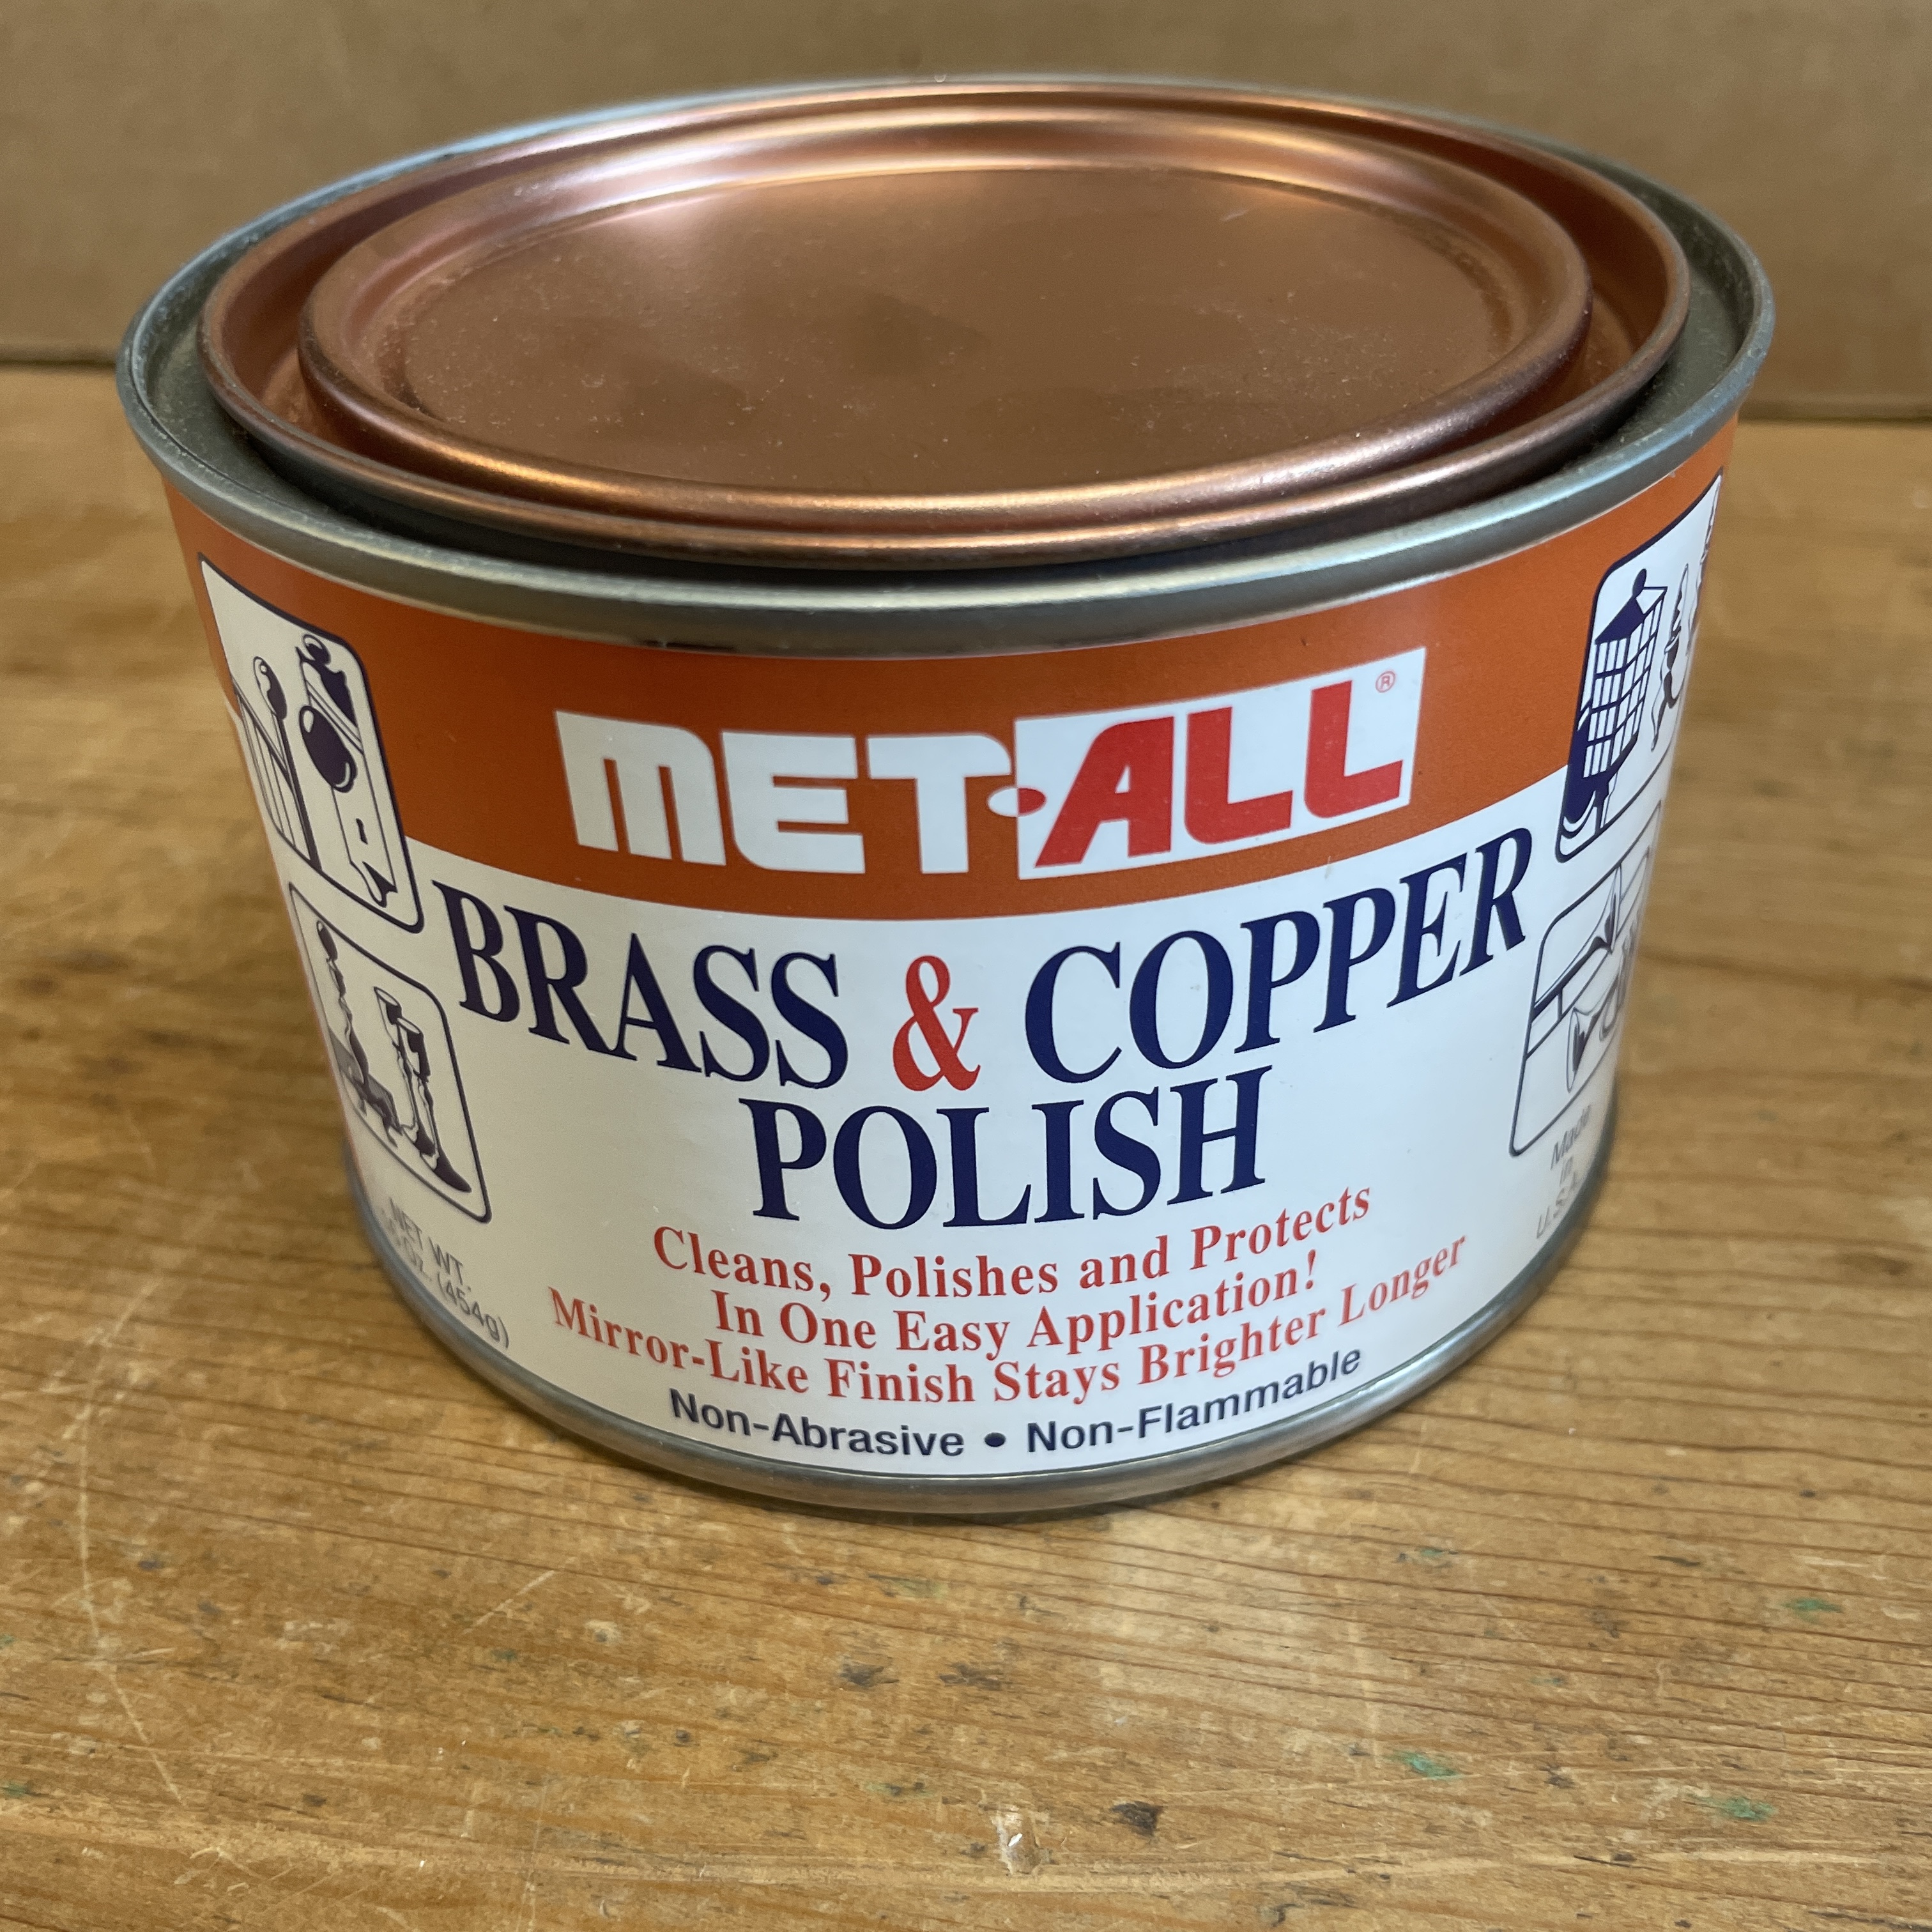 Flitz Brass & Copper Tarnish Remover, Met-all Copper Polish, Cleaning Cloth